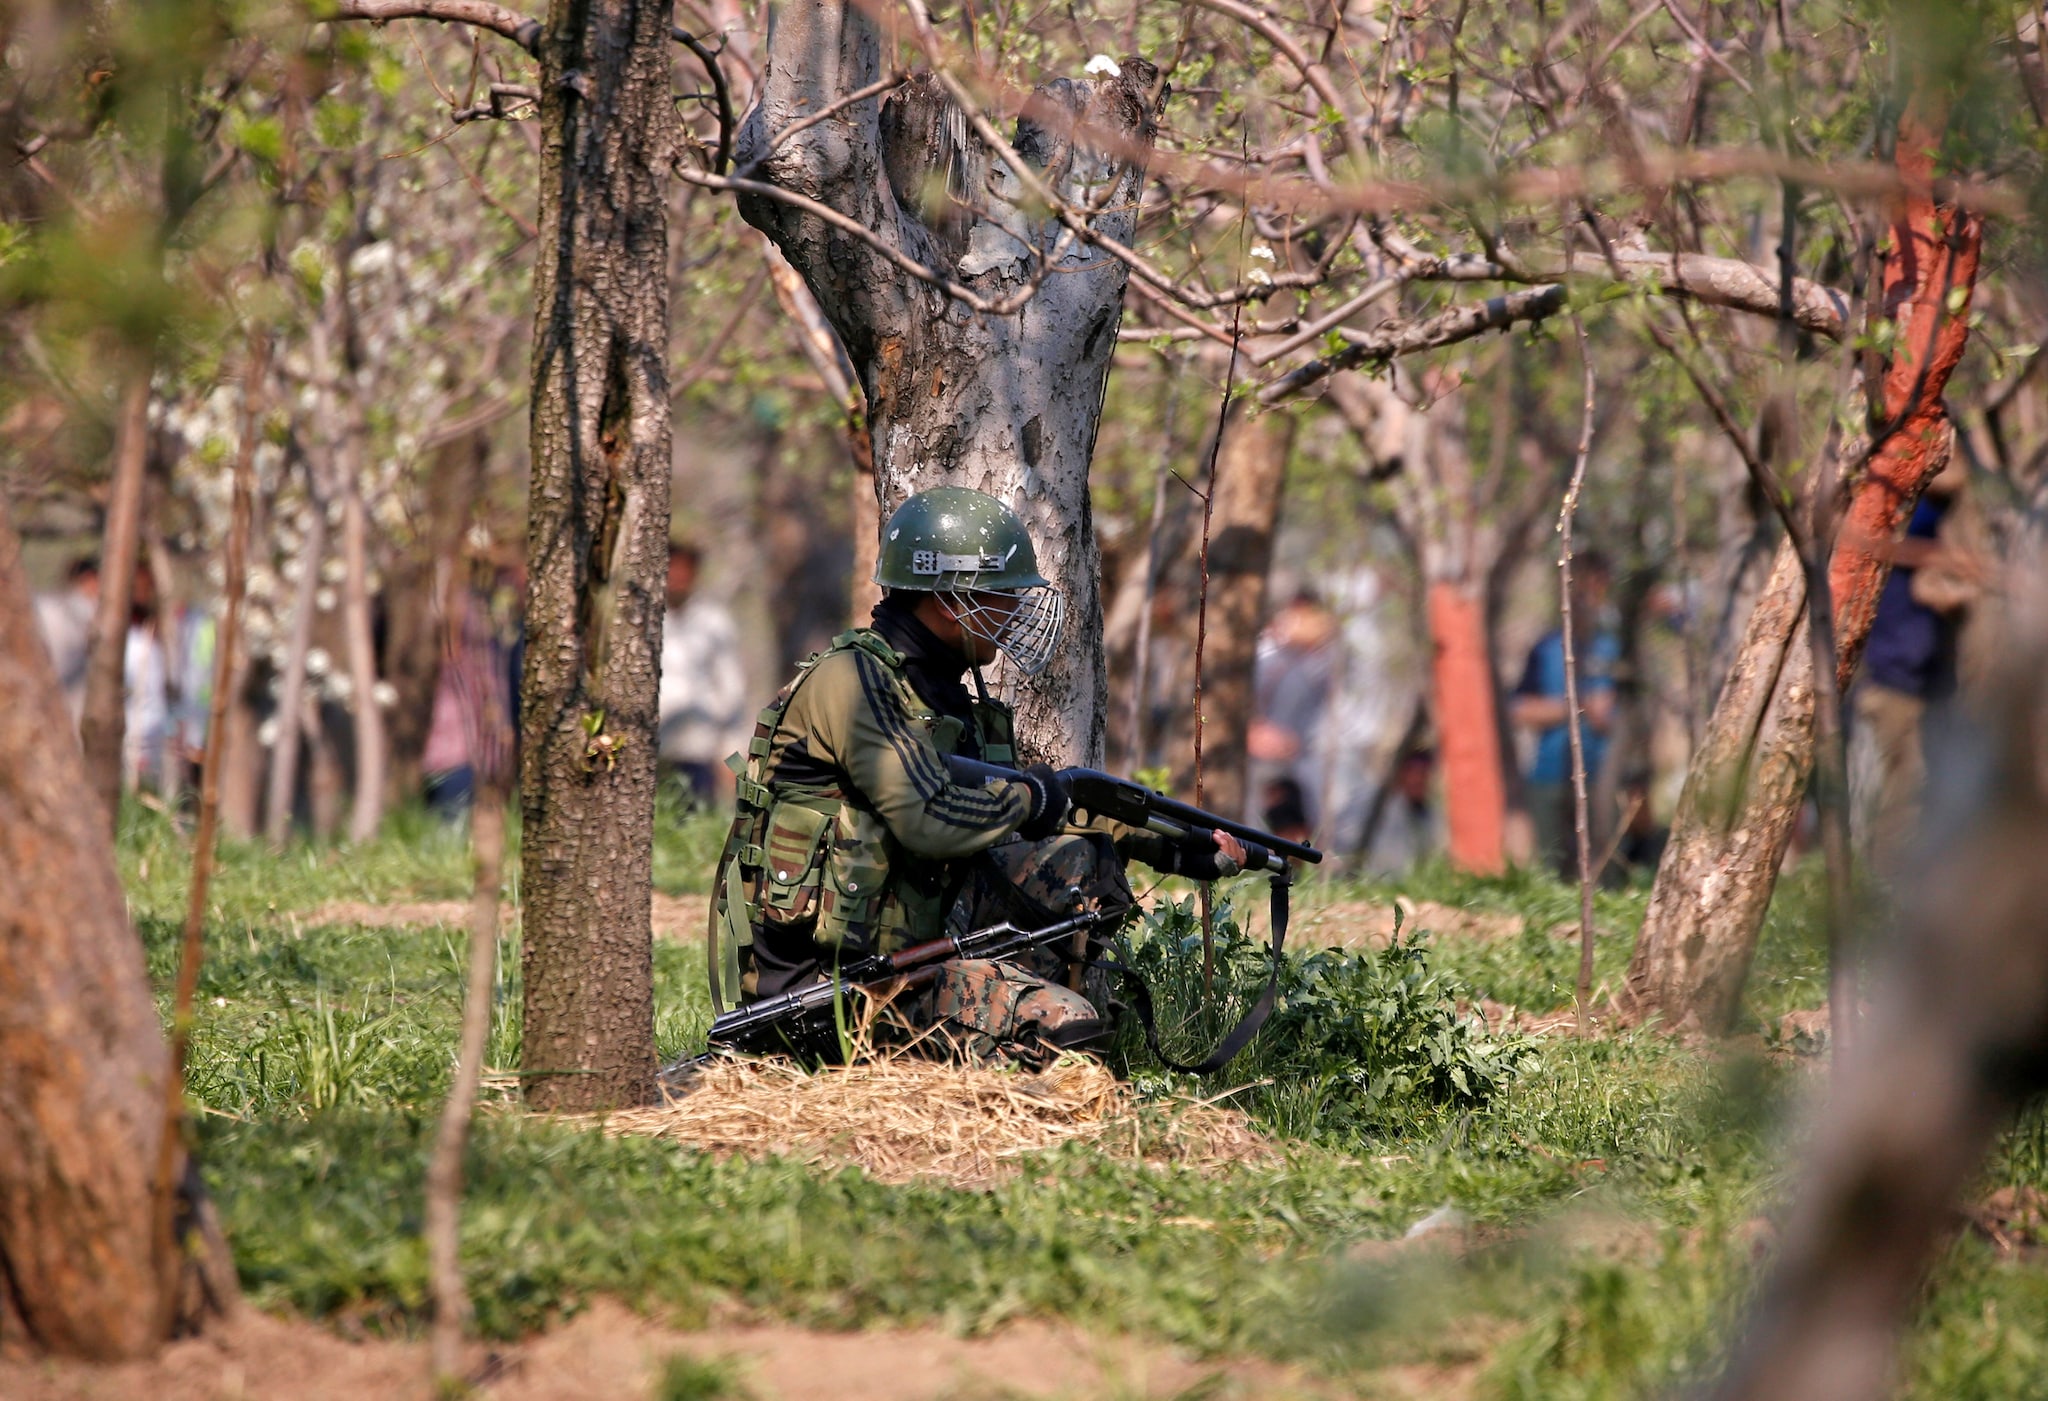 An Indian army soldier takes his position in an orchard near the site of a gunbattle with suspected militants at Kachdoora village in south Kashmir's Shopian district April 1, 2018. REUTERS/Danish Ismail